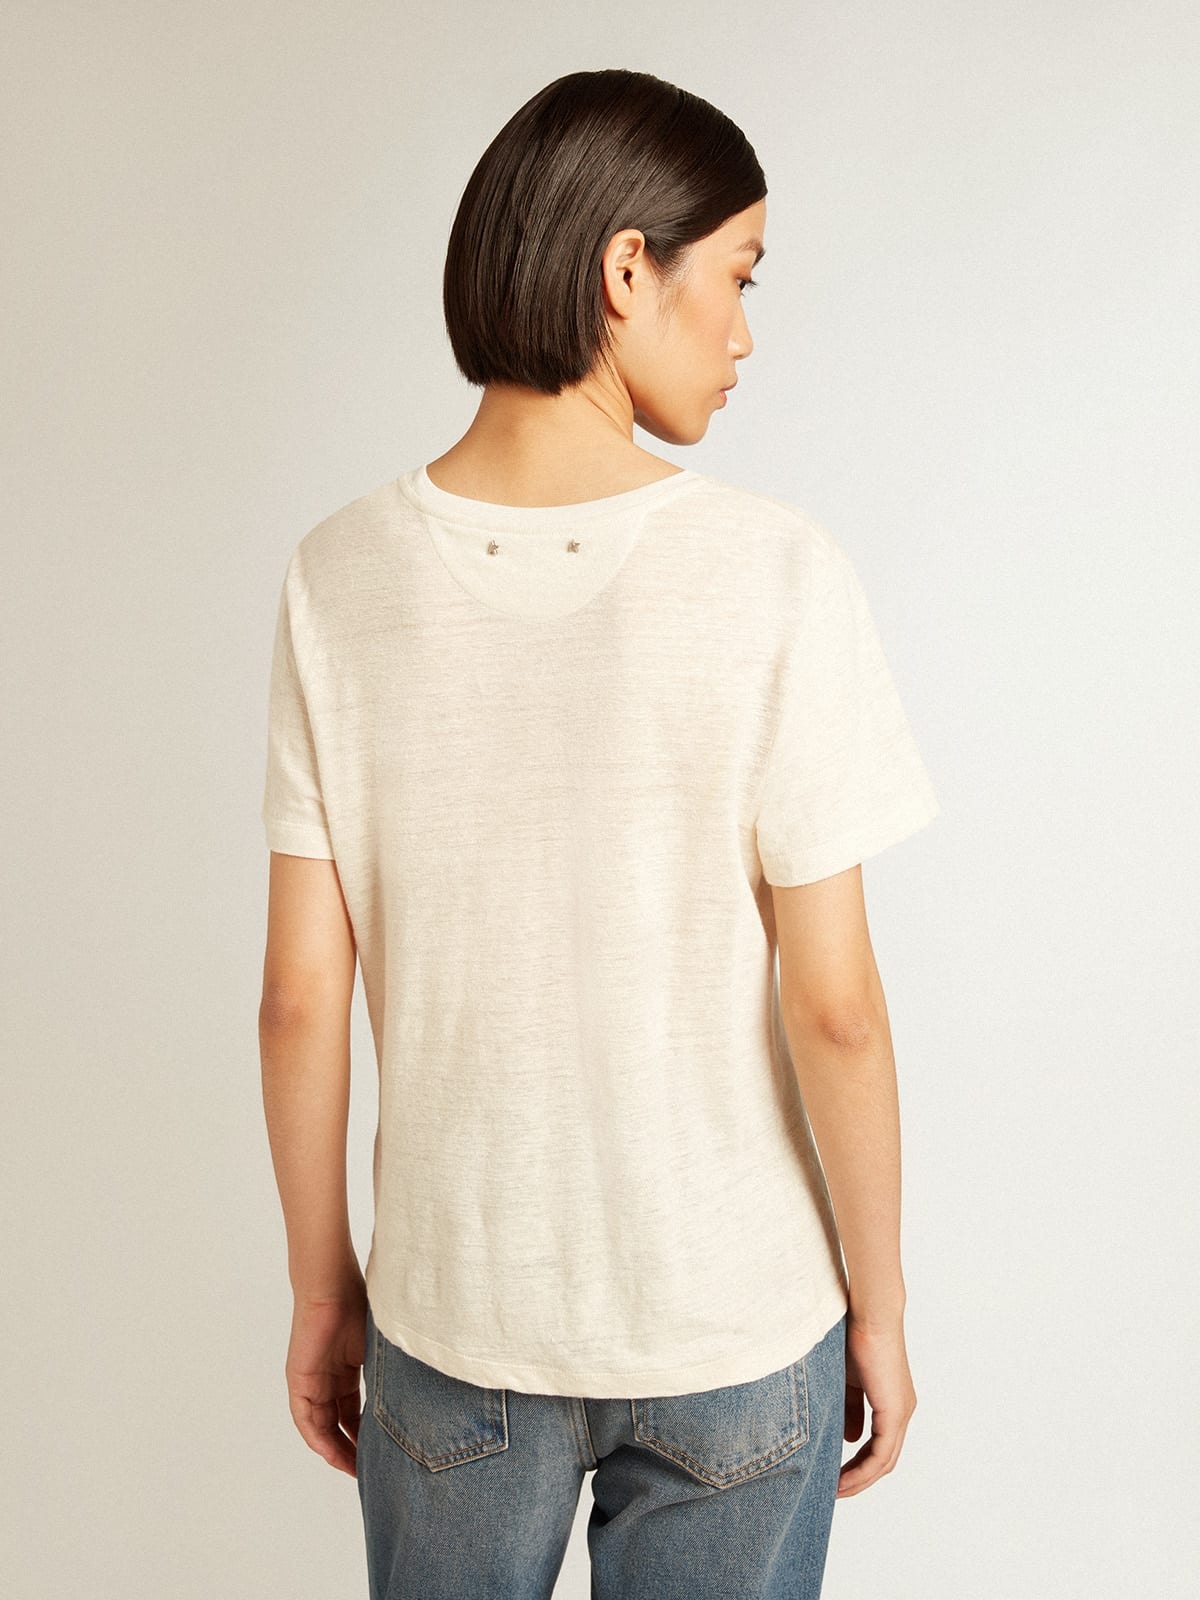 Women’s cotton T-shirt in aged white with embroidered pocket - 4